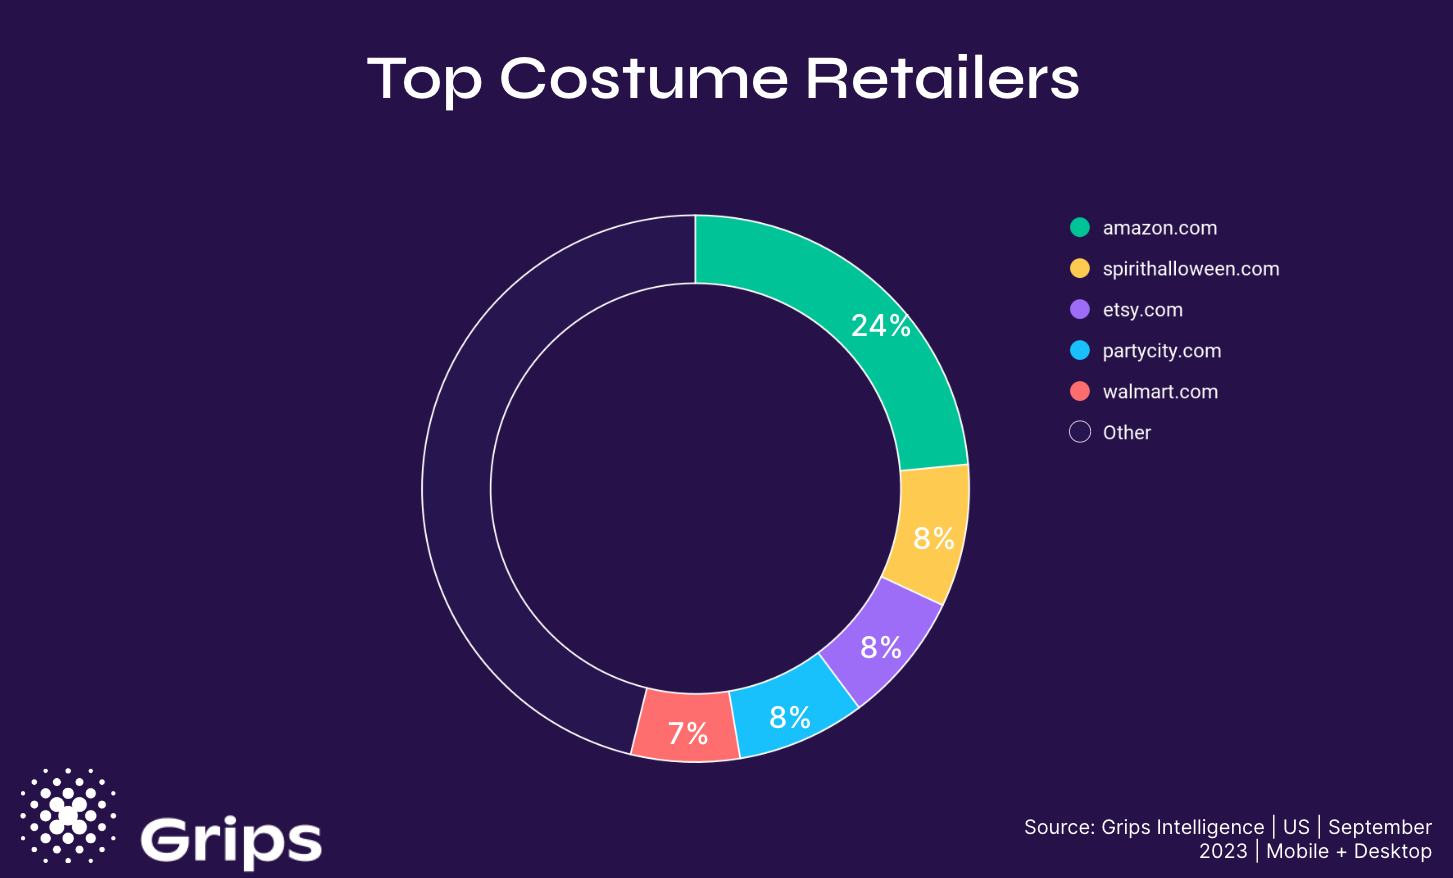 Americans spent 81 million on Costumes online during September, an increase of 4% year-over-year. Of that, Amazon received 24% while Spirt Halloween, Etsy and Party City each received 8%.